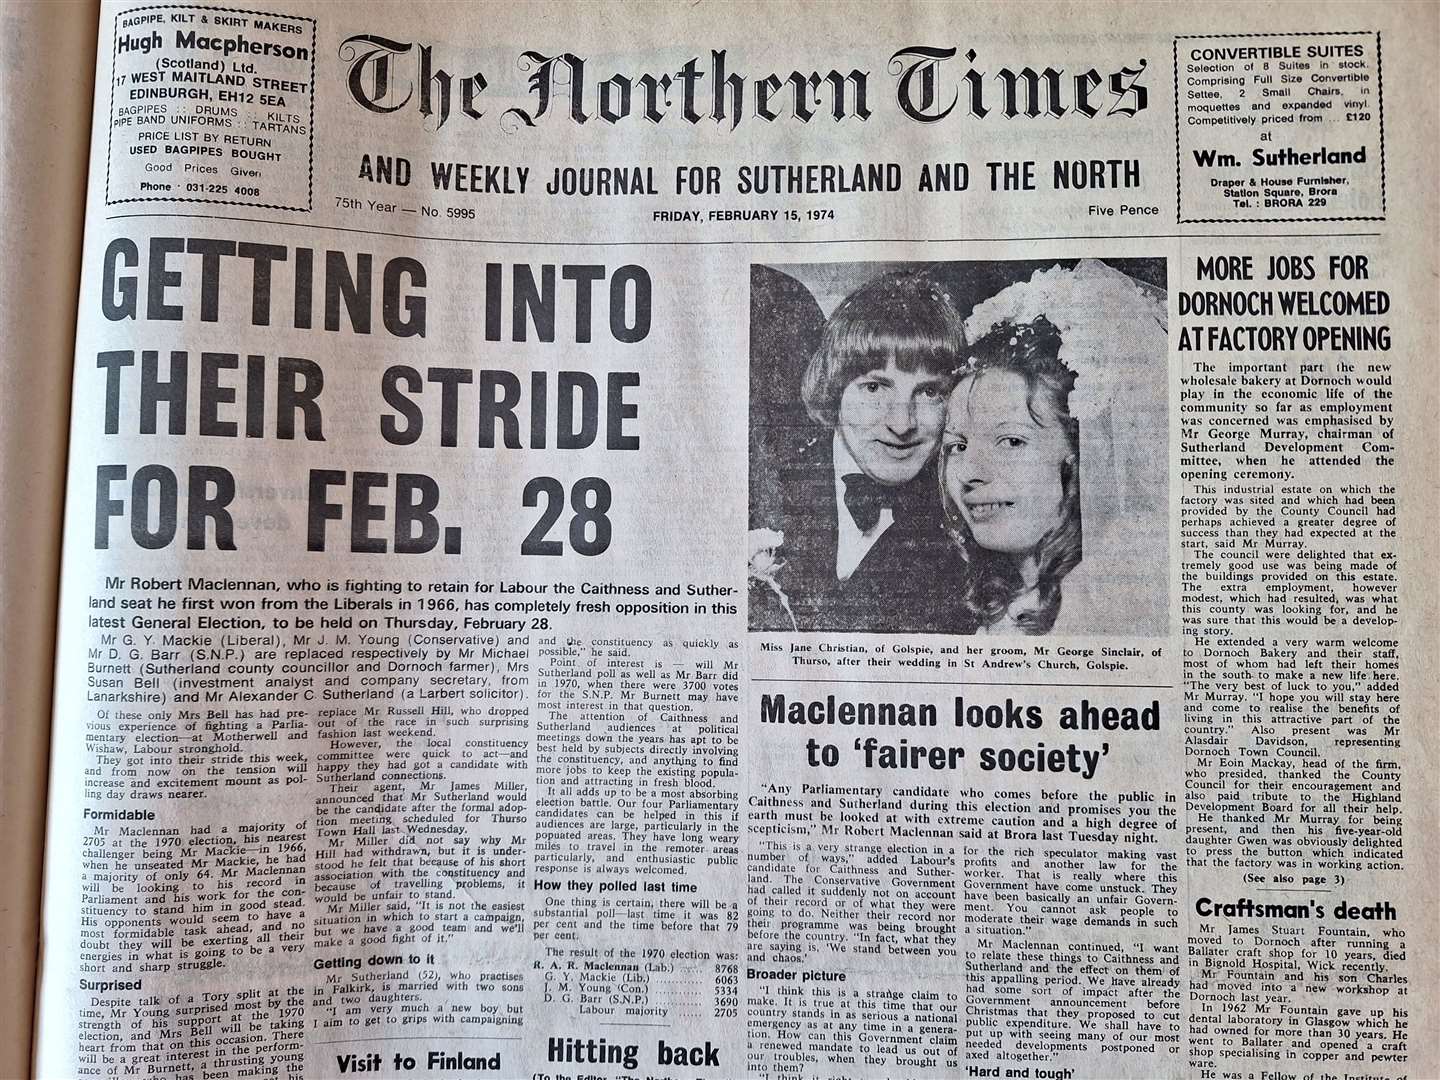 The edition of February 15, 1974.